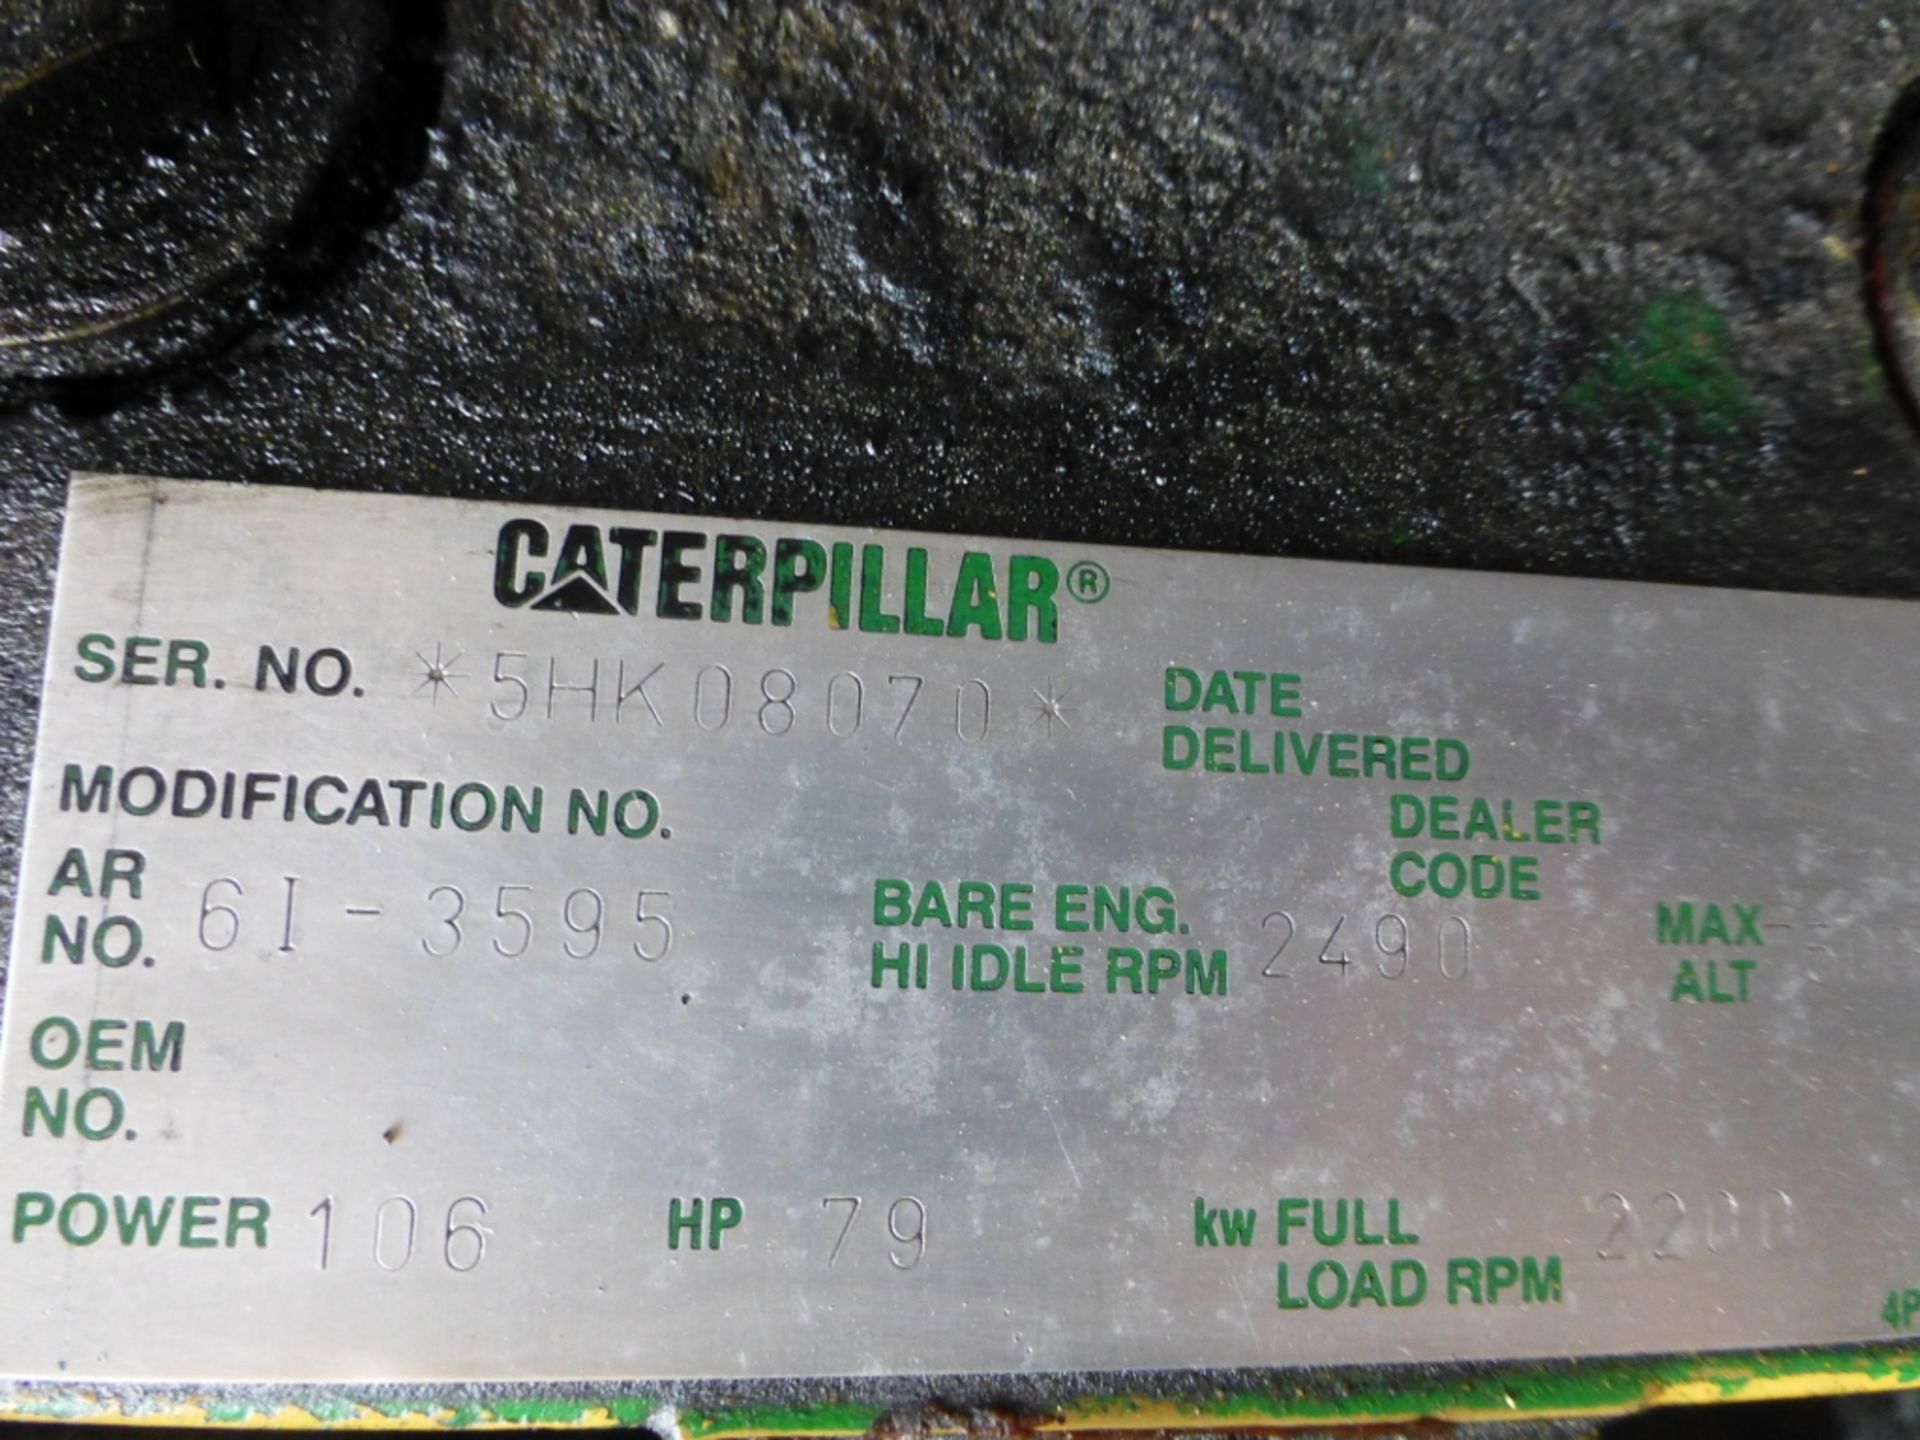 Caterpillar 106Hp, 4 cyl diesel engine. SE: 5hk08070, unknown running condition - Image 6 of 9